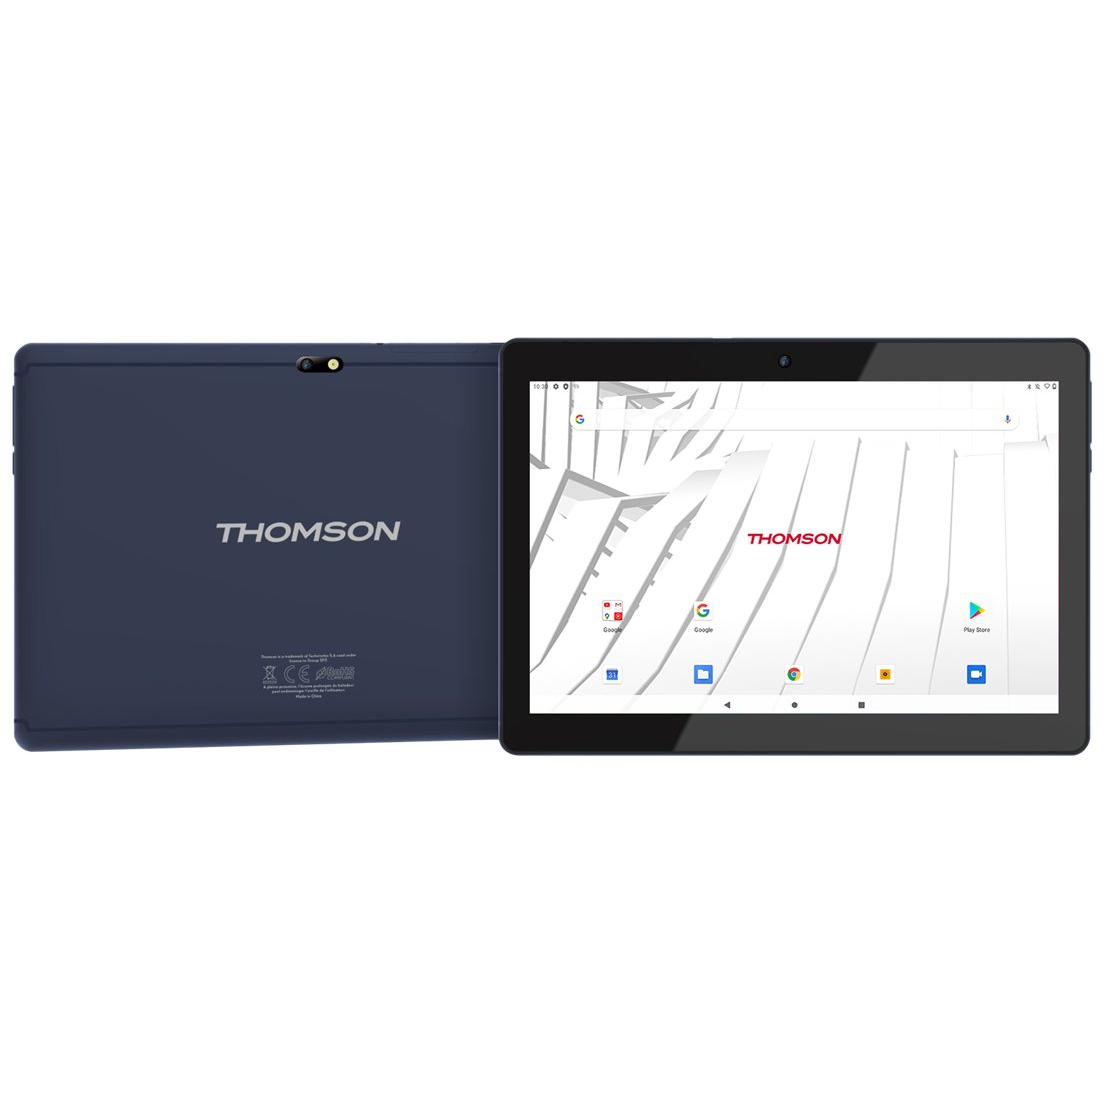 3663792027883 Thomson TEO 10'' IPS, 64GB, WiFi, Android 12, Black - Androi Computer & IT,Tablets,Android tablets 14600016700 TEO10A4BK64P